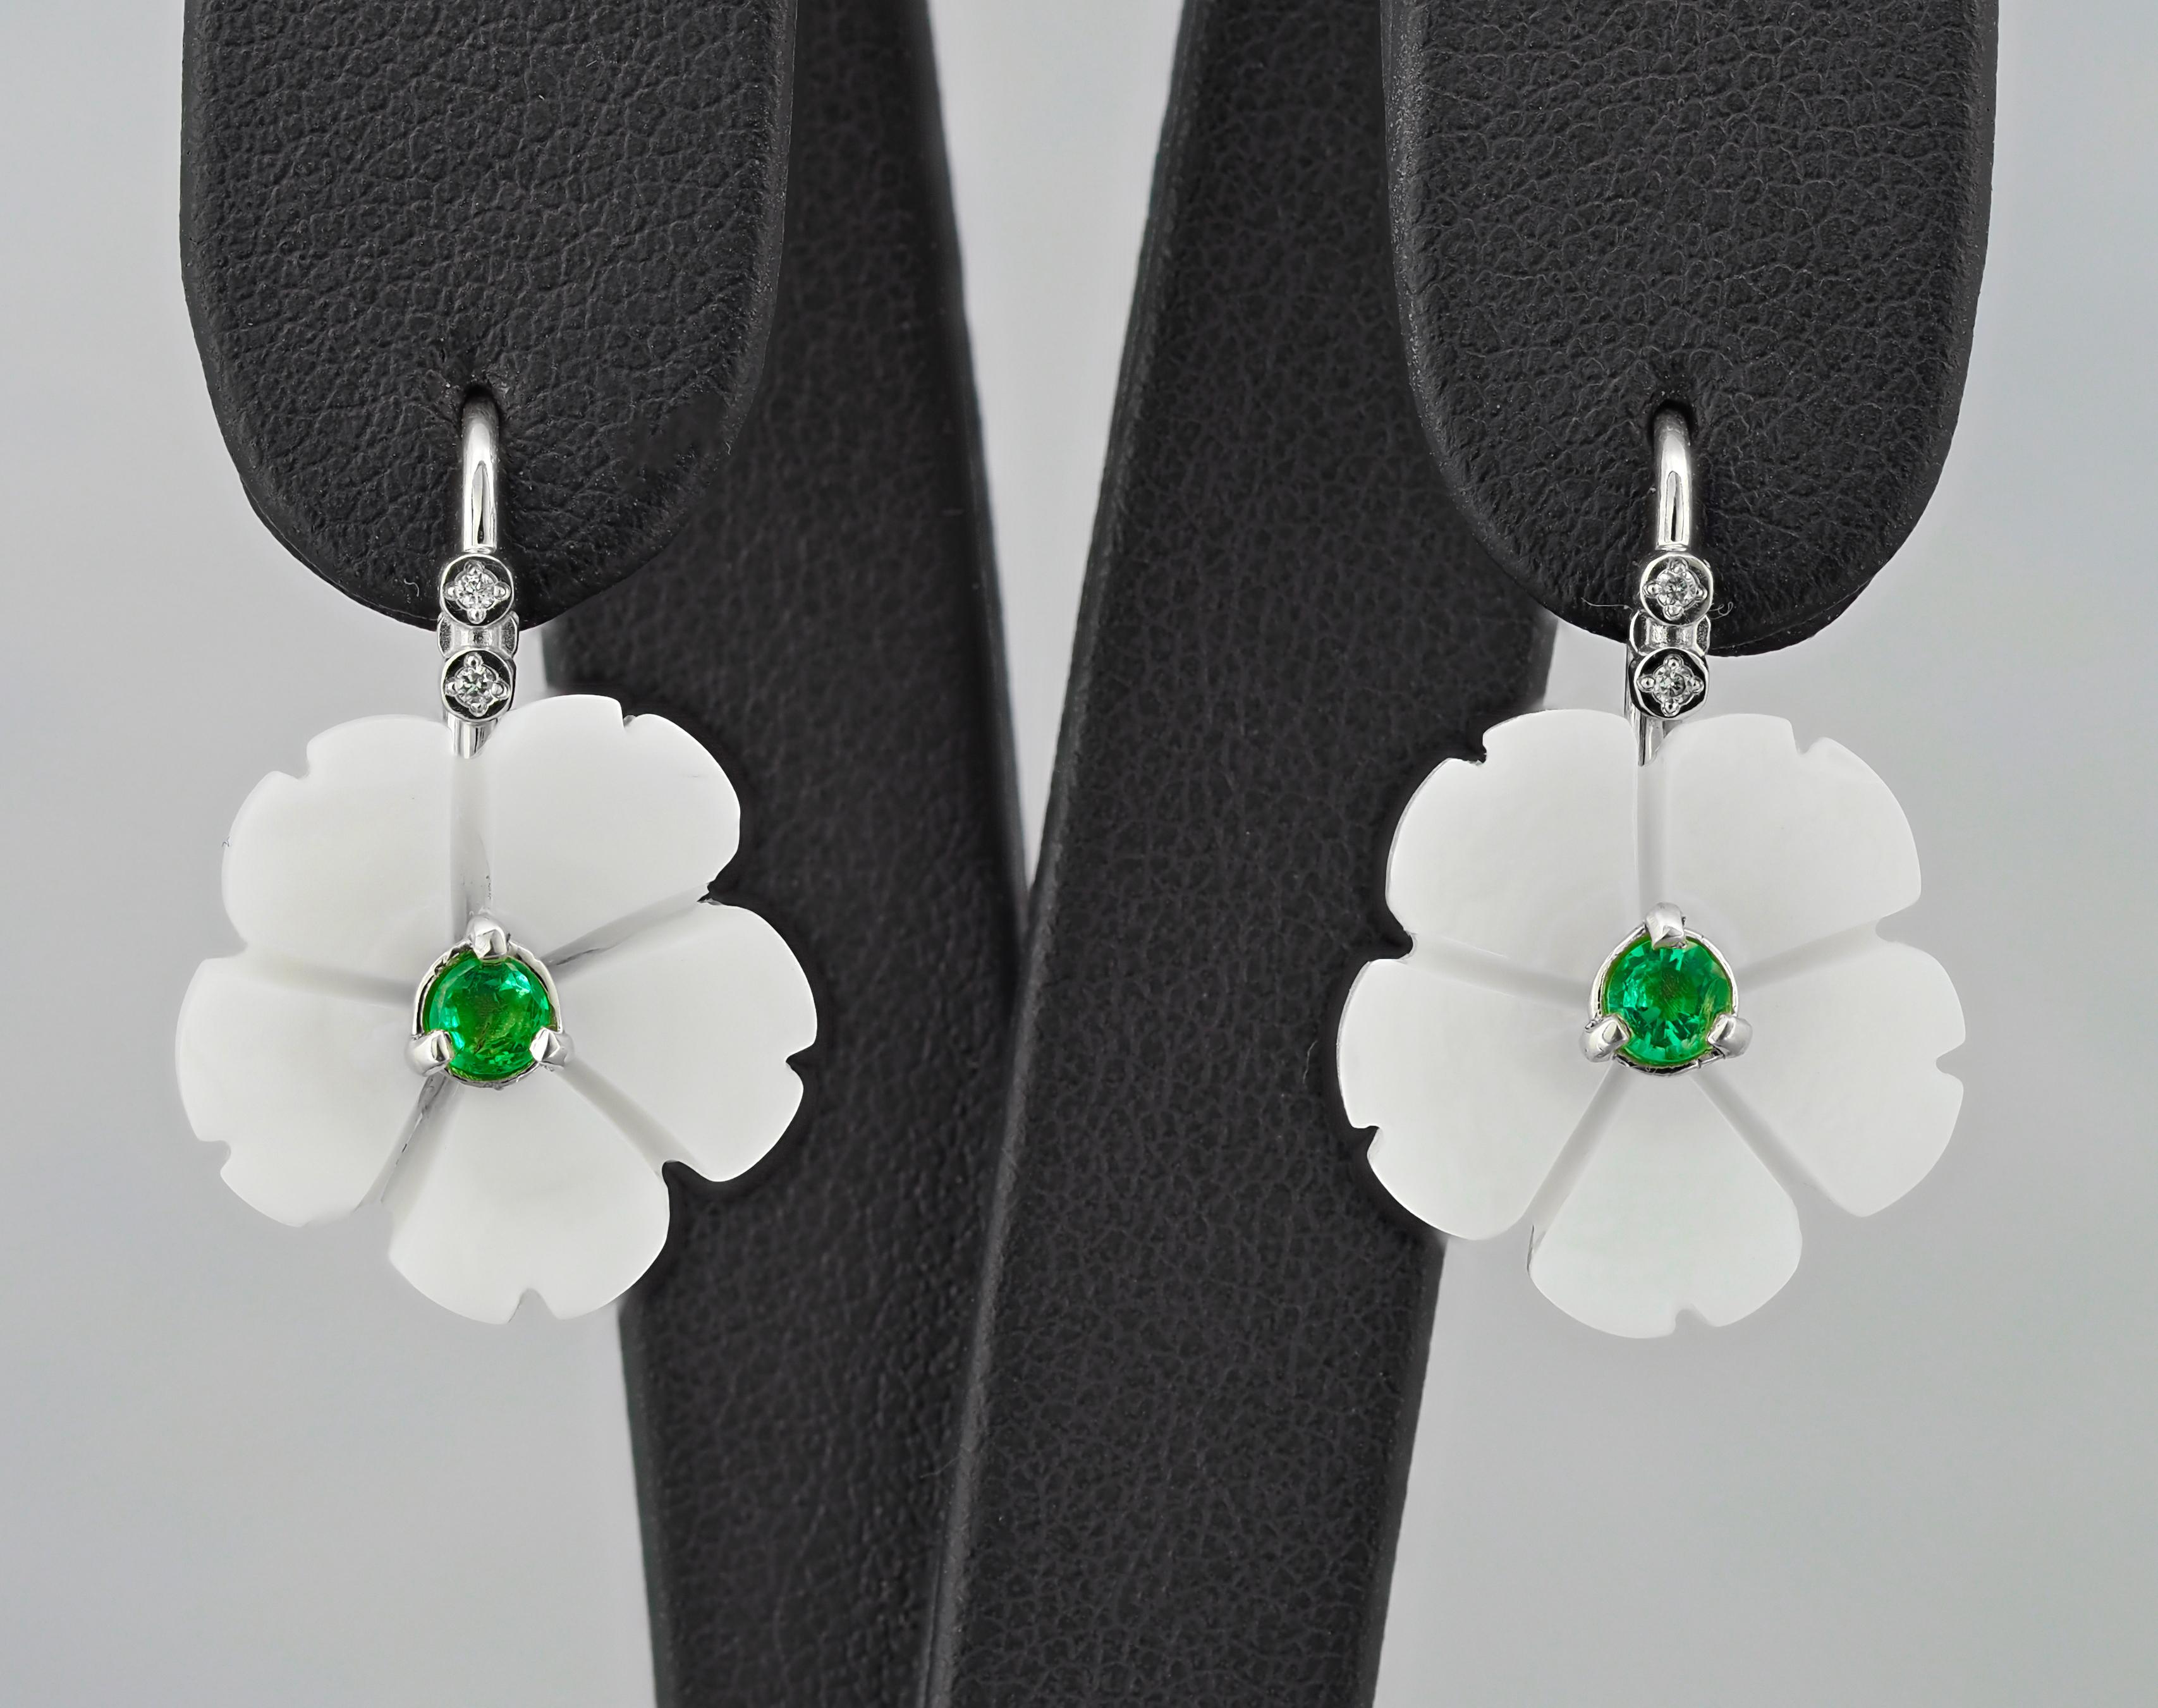 Flower 14k gold earrings with emeralds. Emeralds and carved mother of pearl earrings. 

Metal: 14k gold. 
Weight: 3 gr
Central stone: Emeralds- 2 pieces 
Cut: Round  
Weight: aprx 0.25 ct. total. 
Color: green
Clarity: Transparent with inclusions